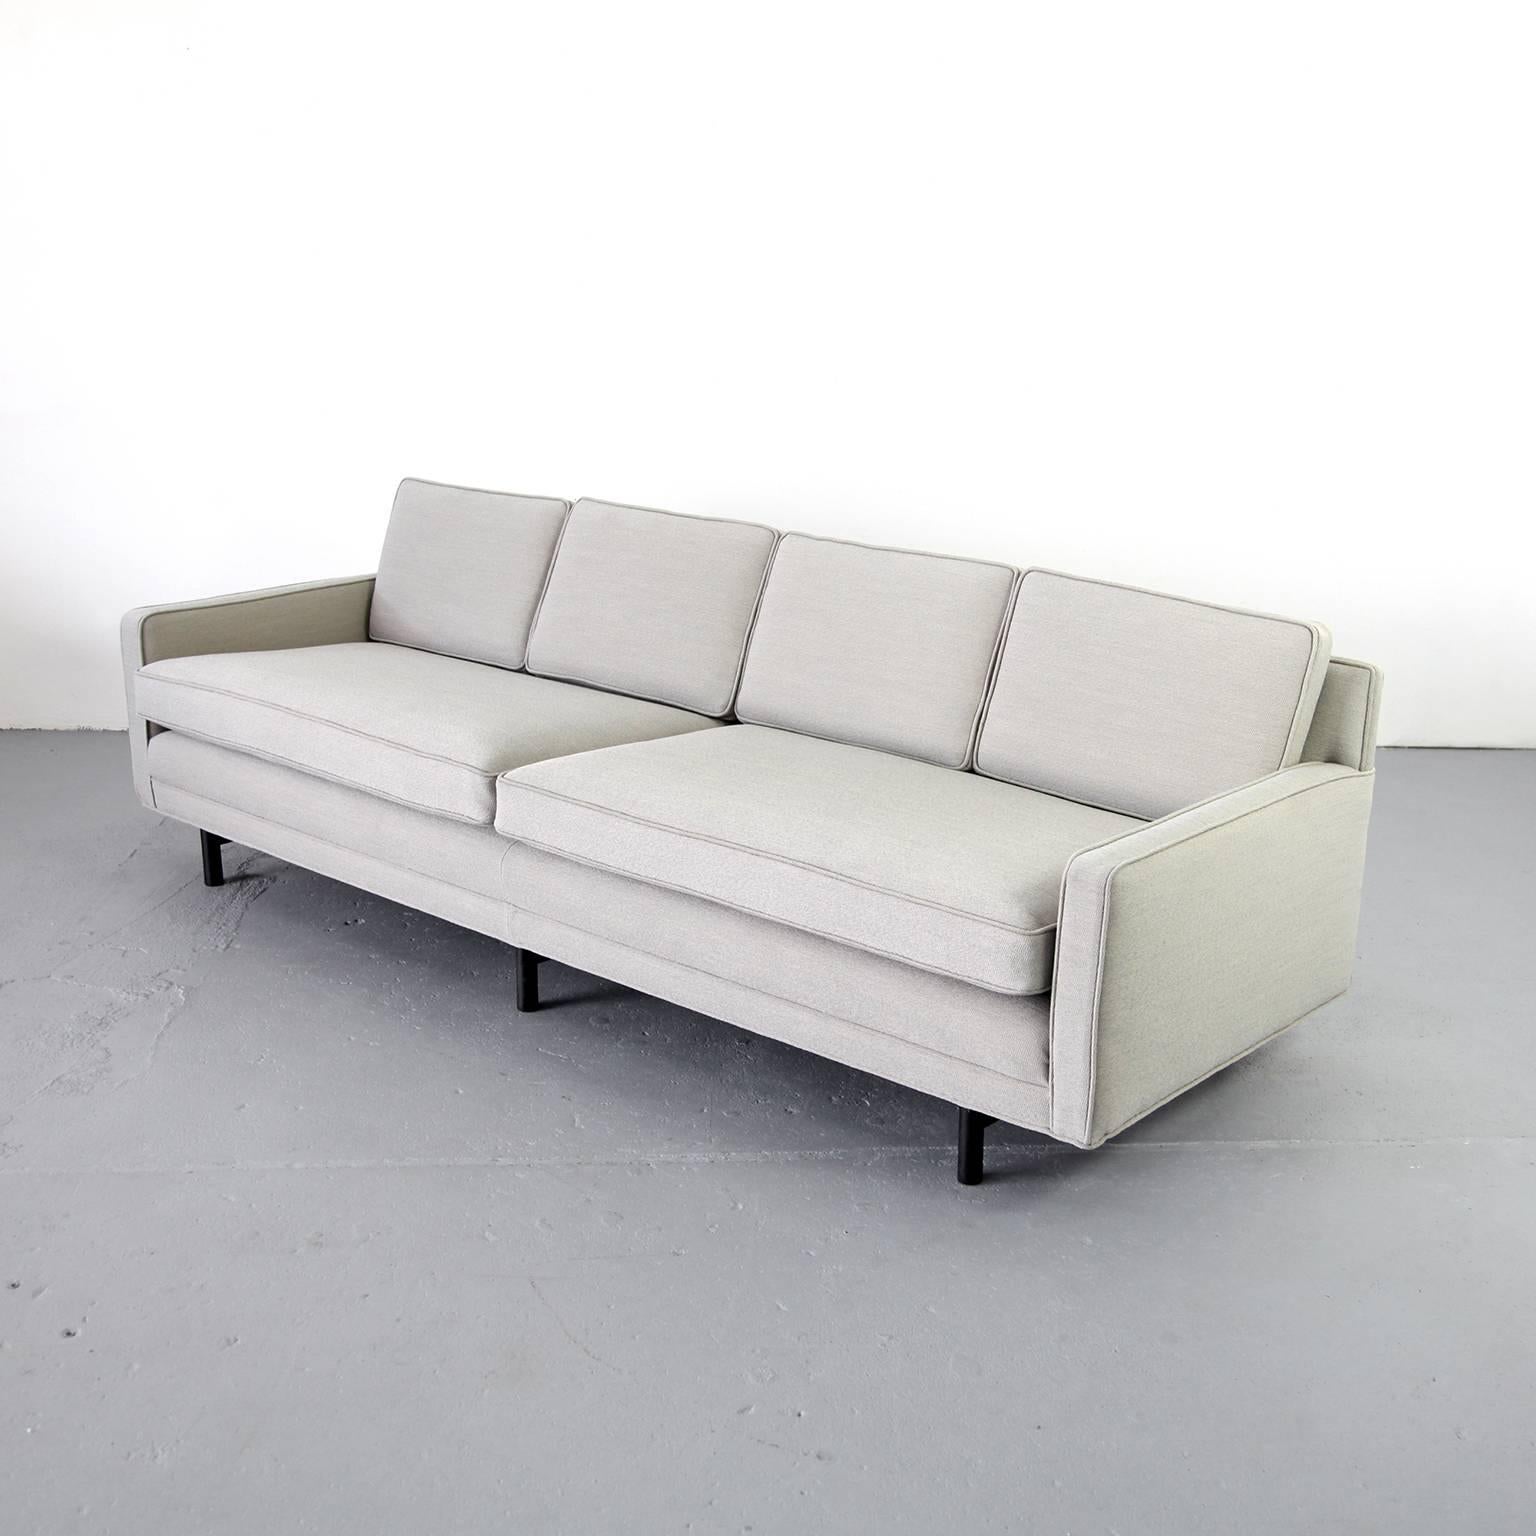 American Four-Seat Sofa by Paul McCobb for Directional, USA